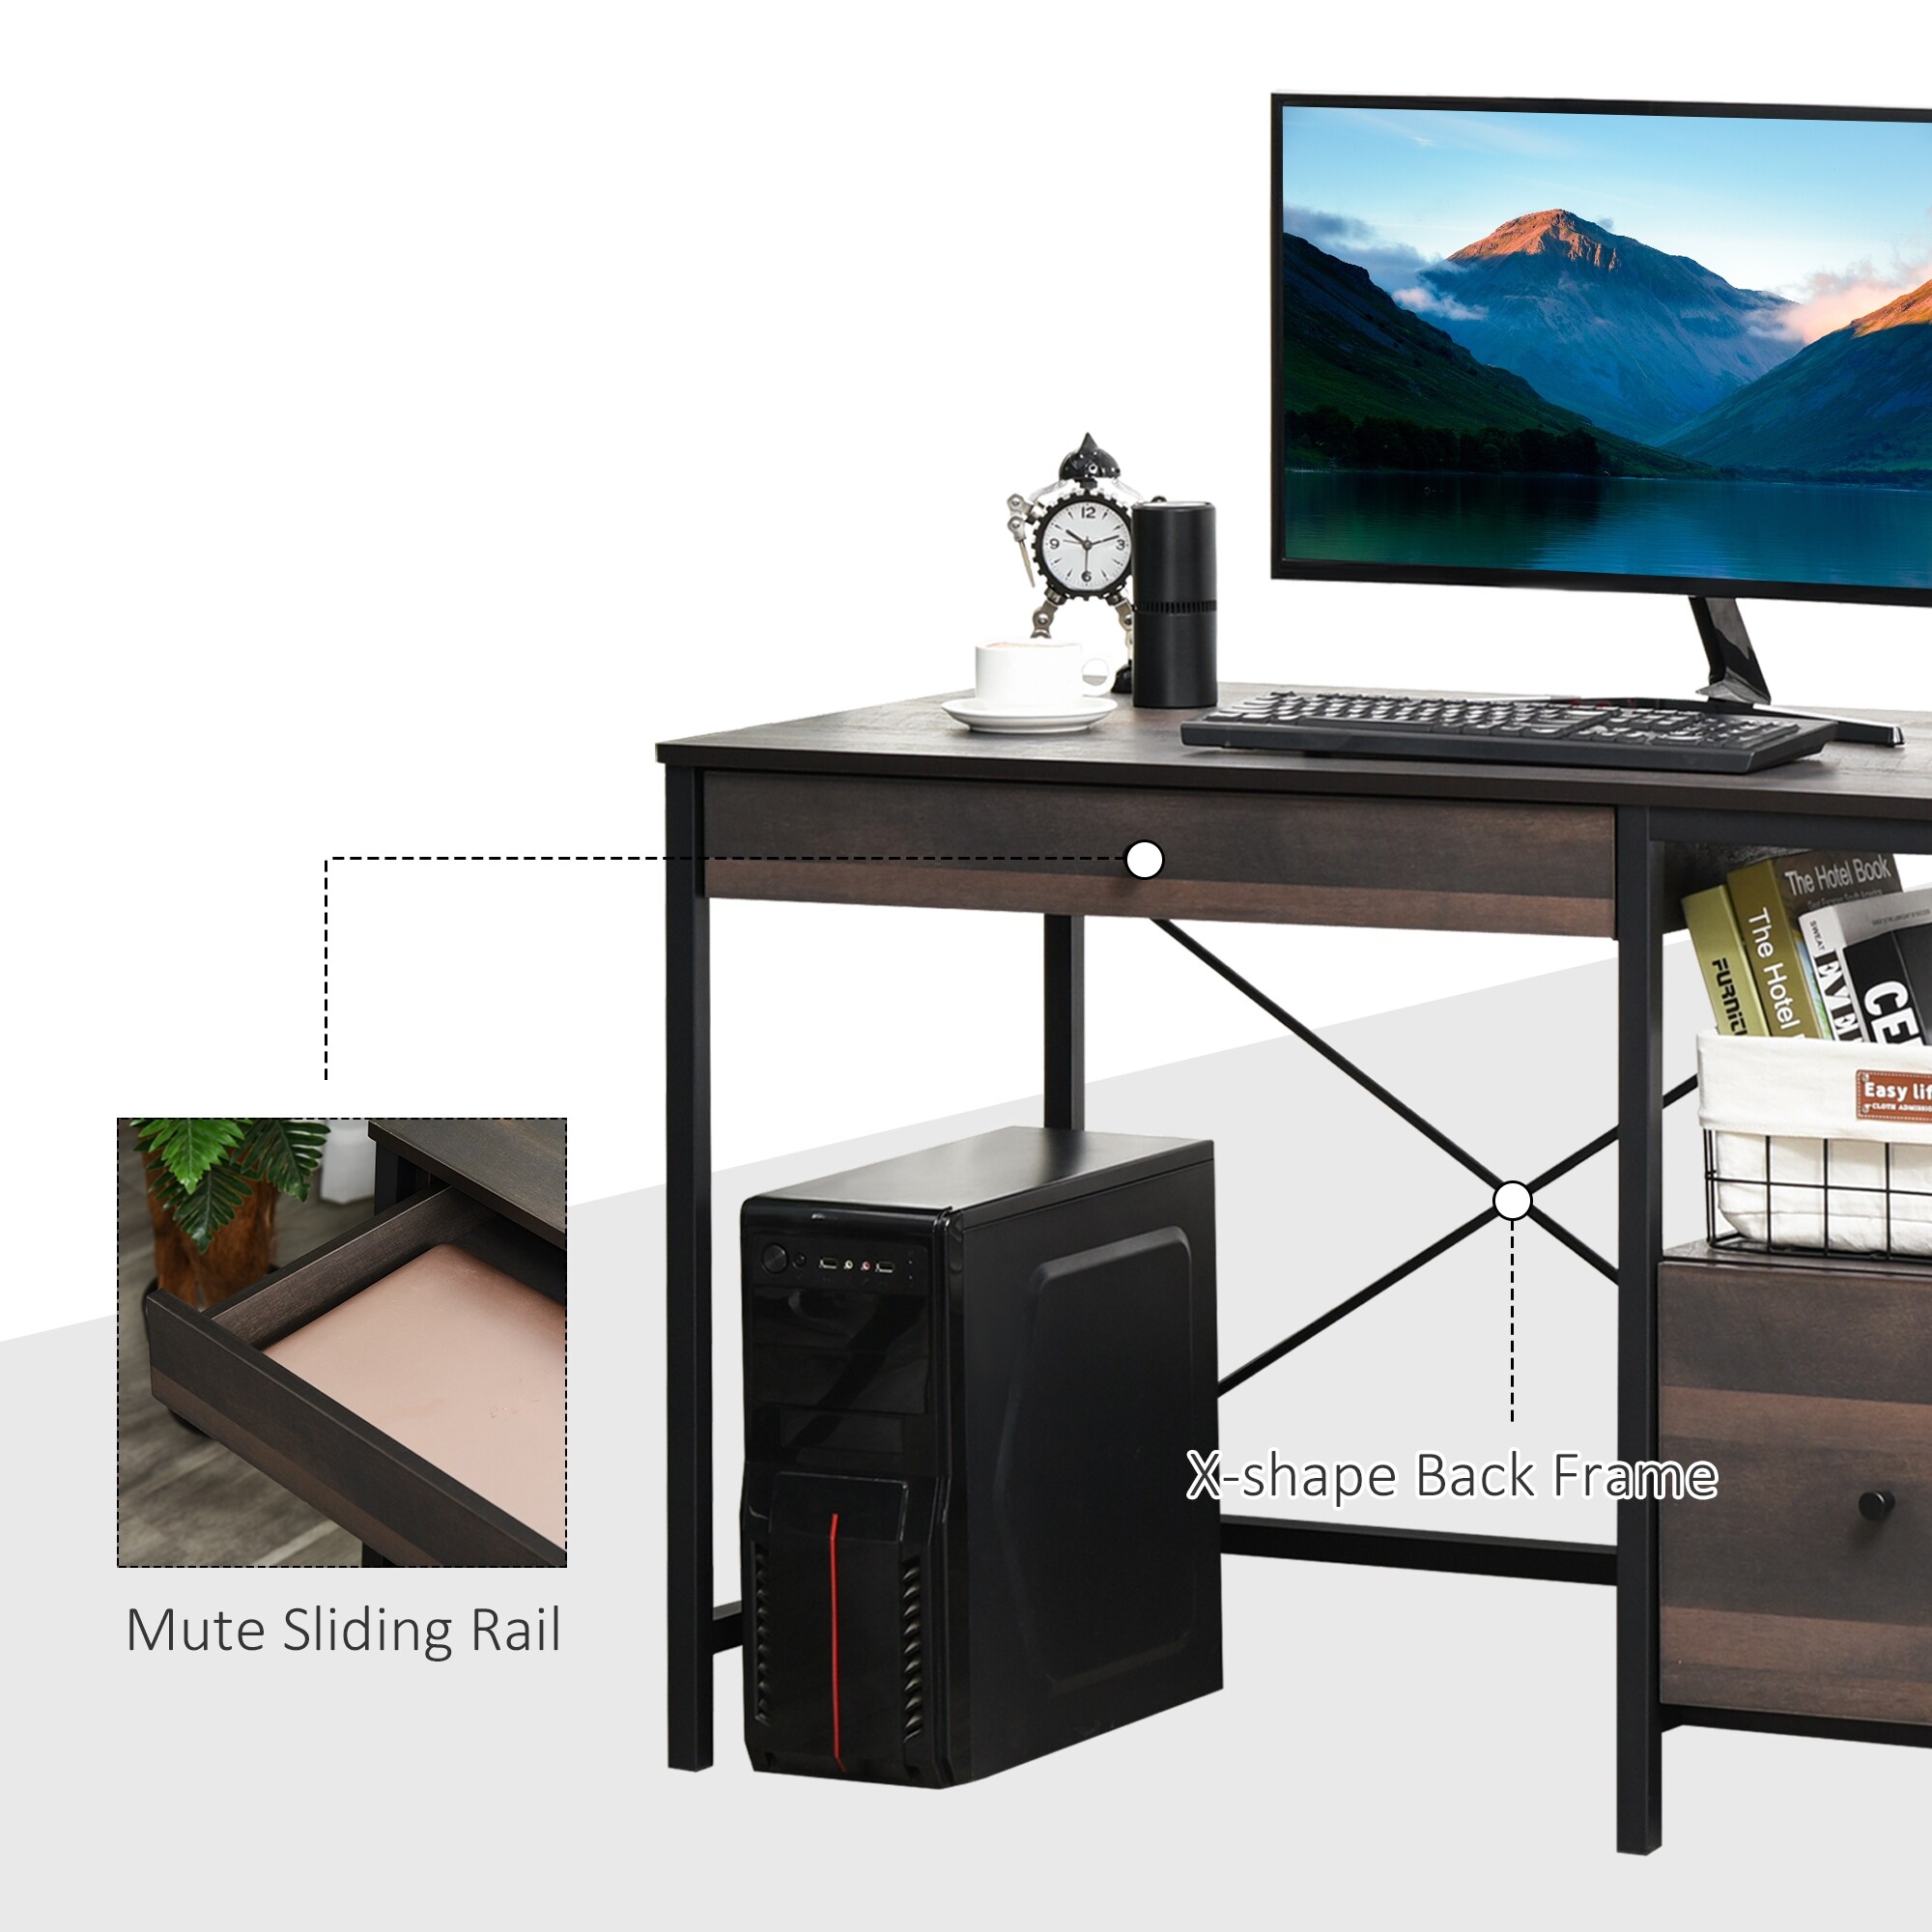 HOMCOM Computer Desk w/ Storage, Writing Study Table for Home Office, Brown